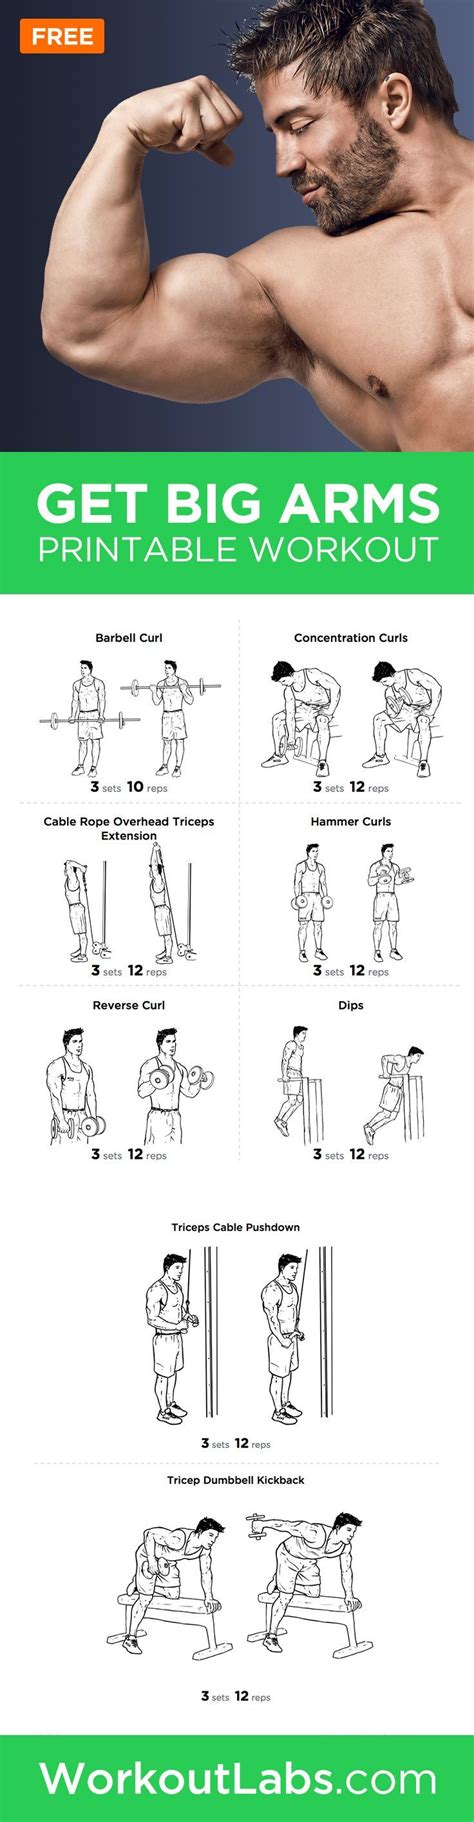 Big Arms Workout Biceps And Triceps Exercises Printable Routine